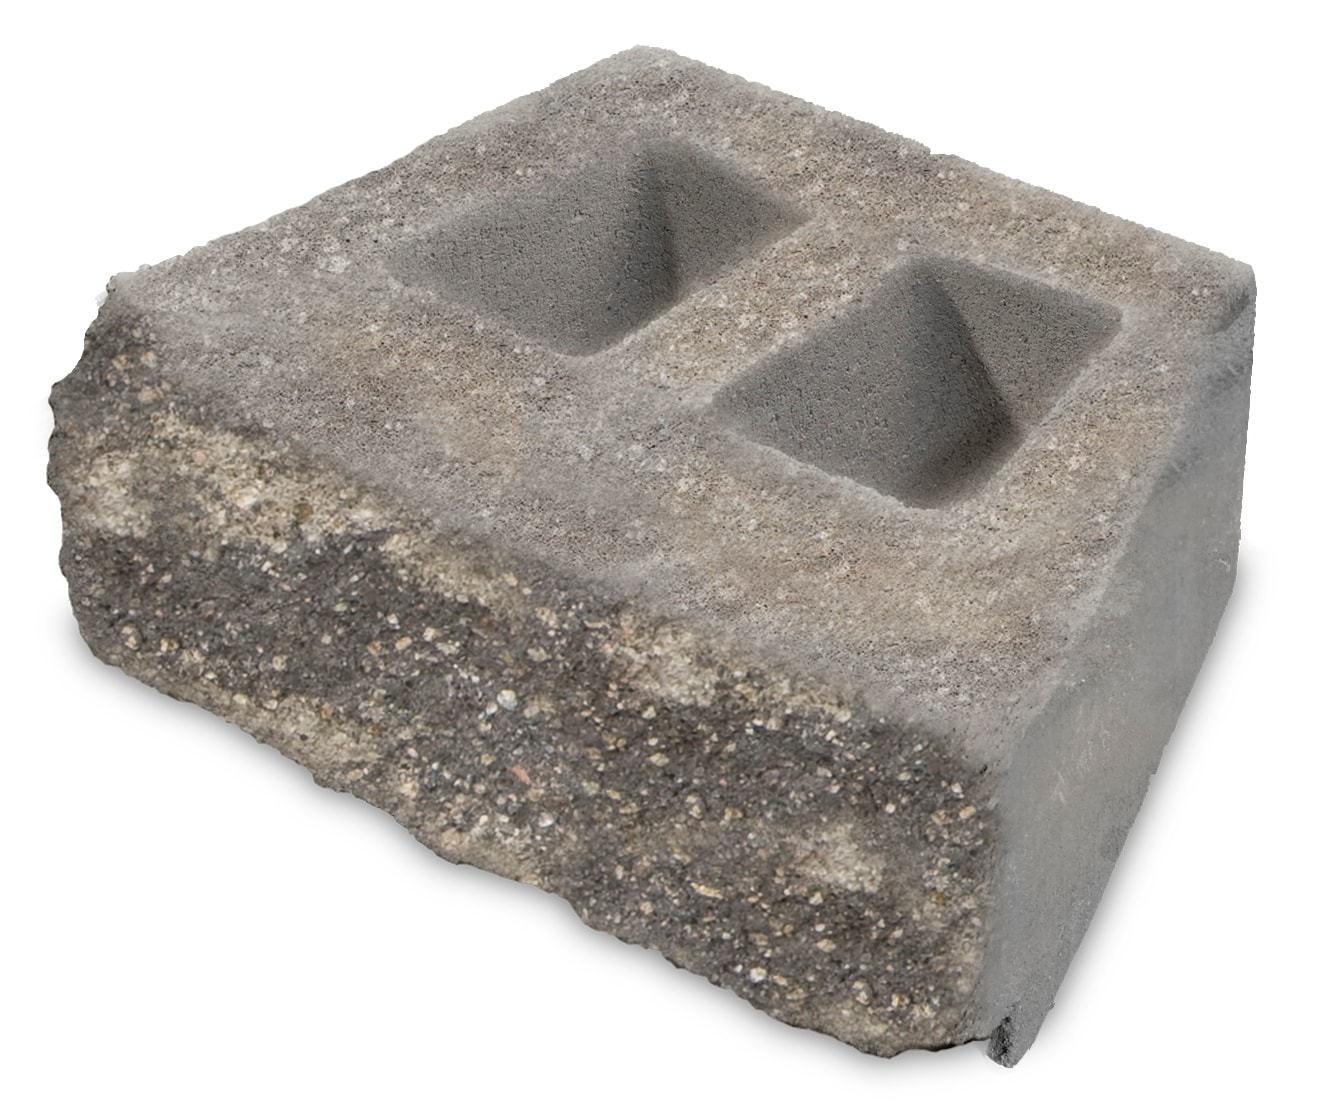 6-in H x 16-in L x 10-in D Gray/Charcoal Concrete Retaining Wall Block | - Lowe's 595950B03L